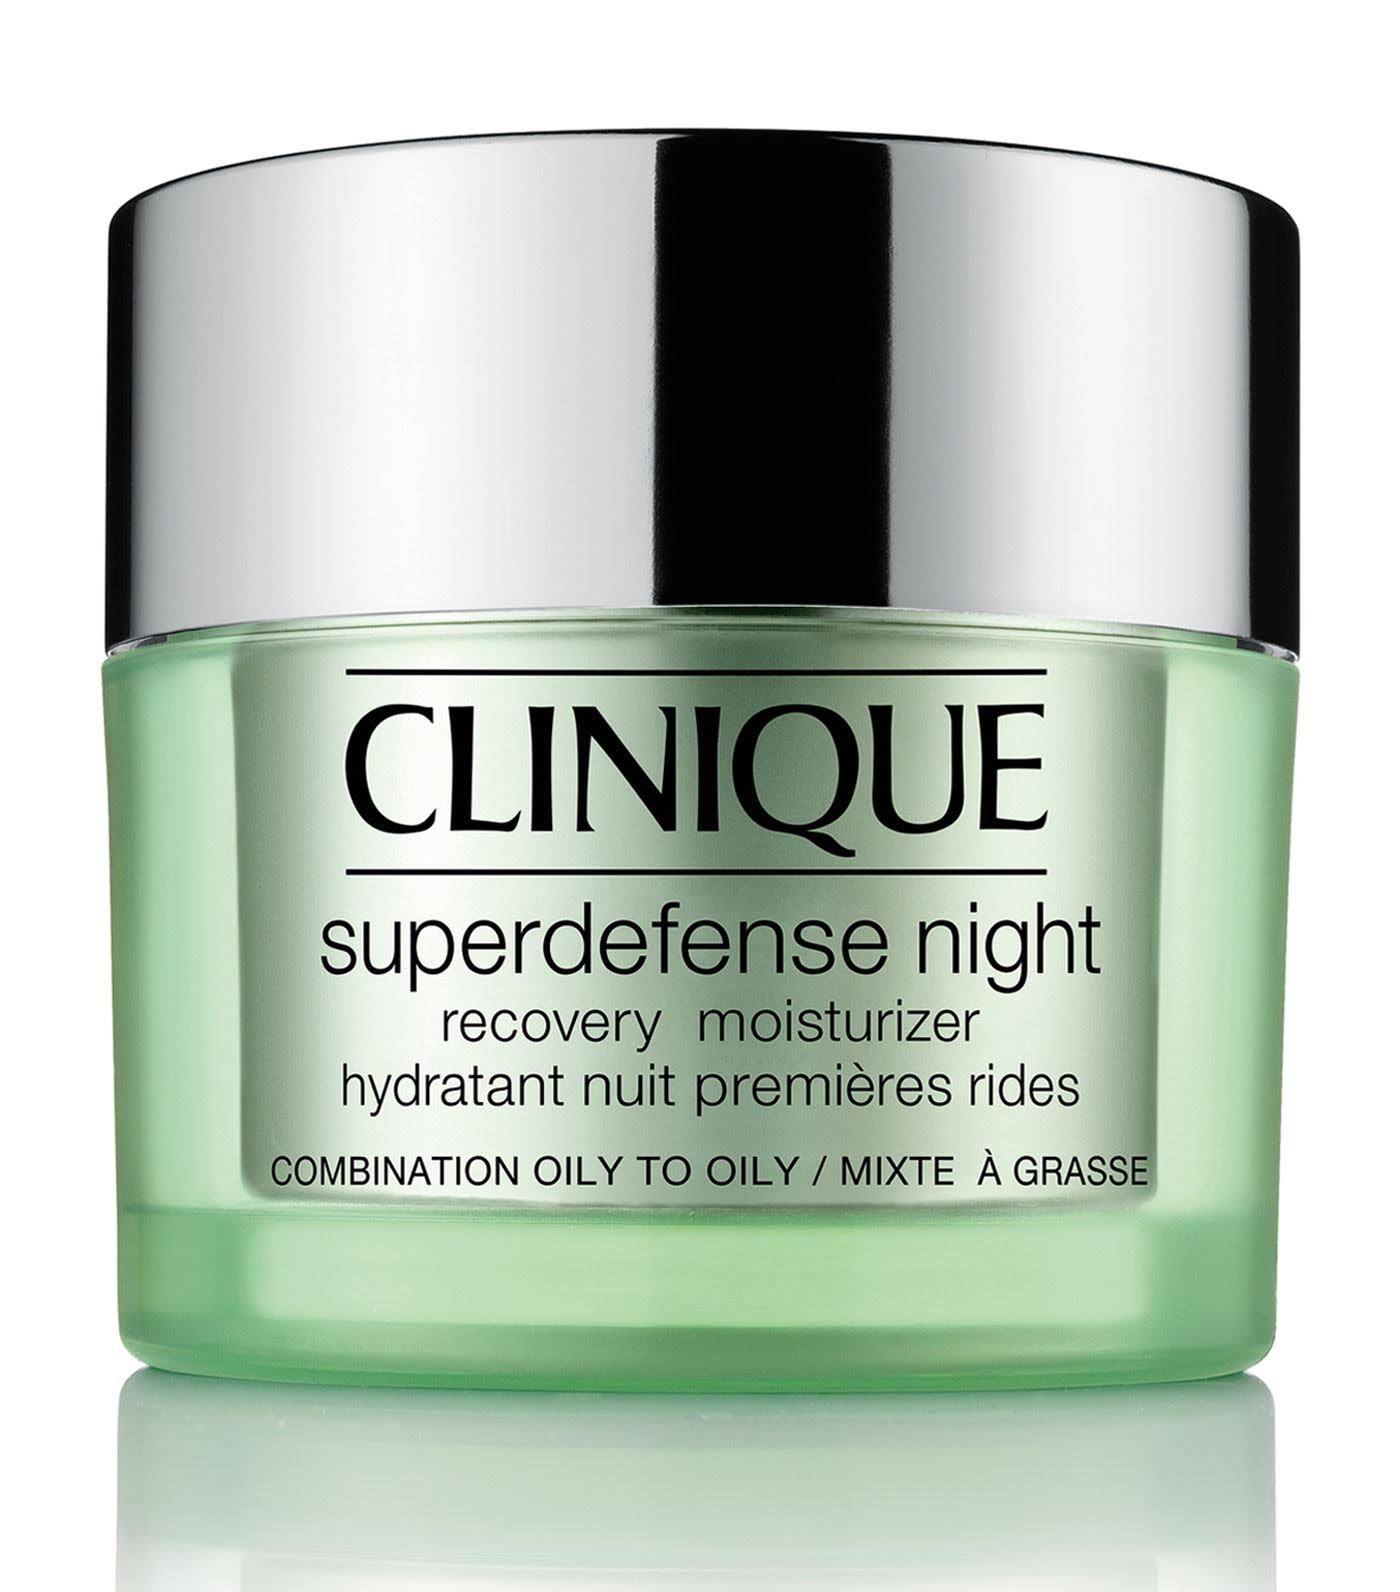 Clinique Superdefense Night Recovery Moisturizer (For 1.7oz, 50ml